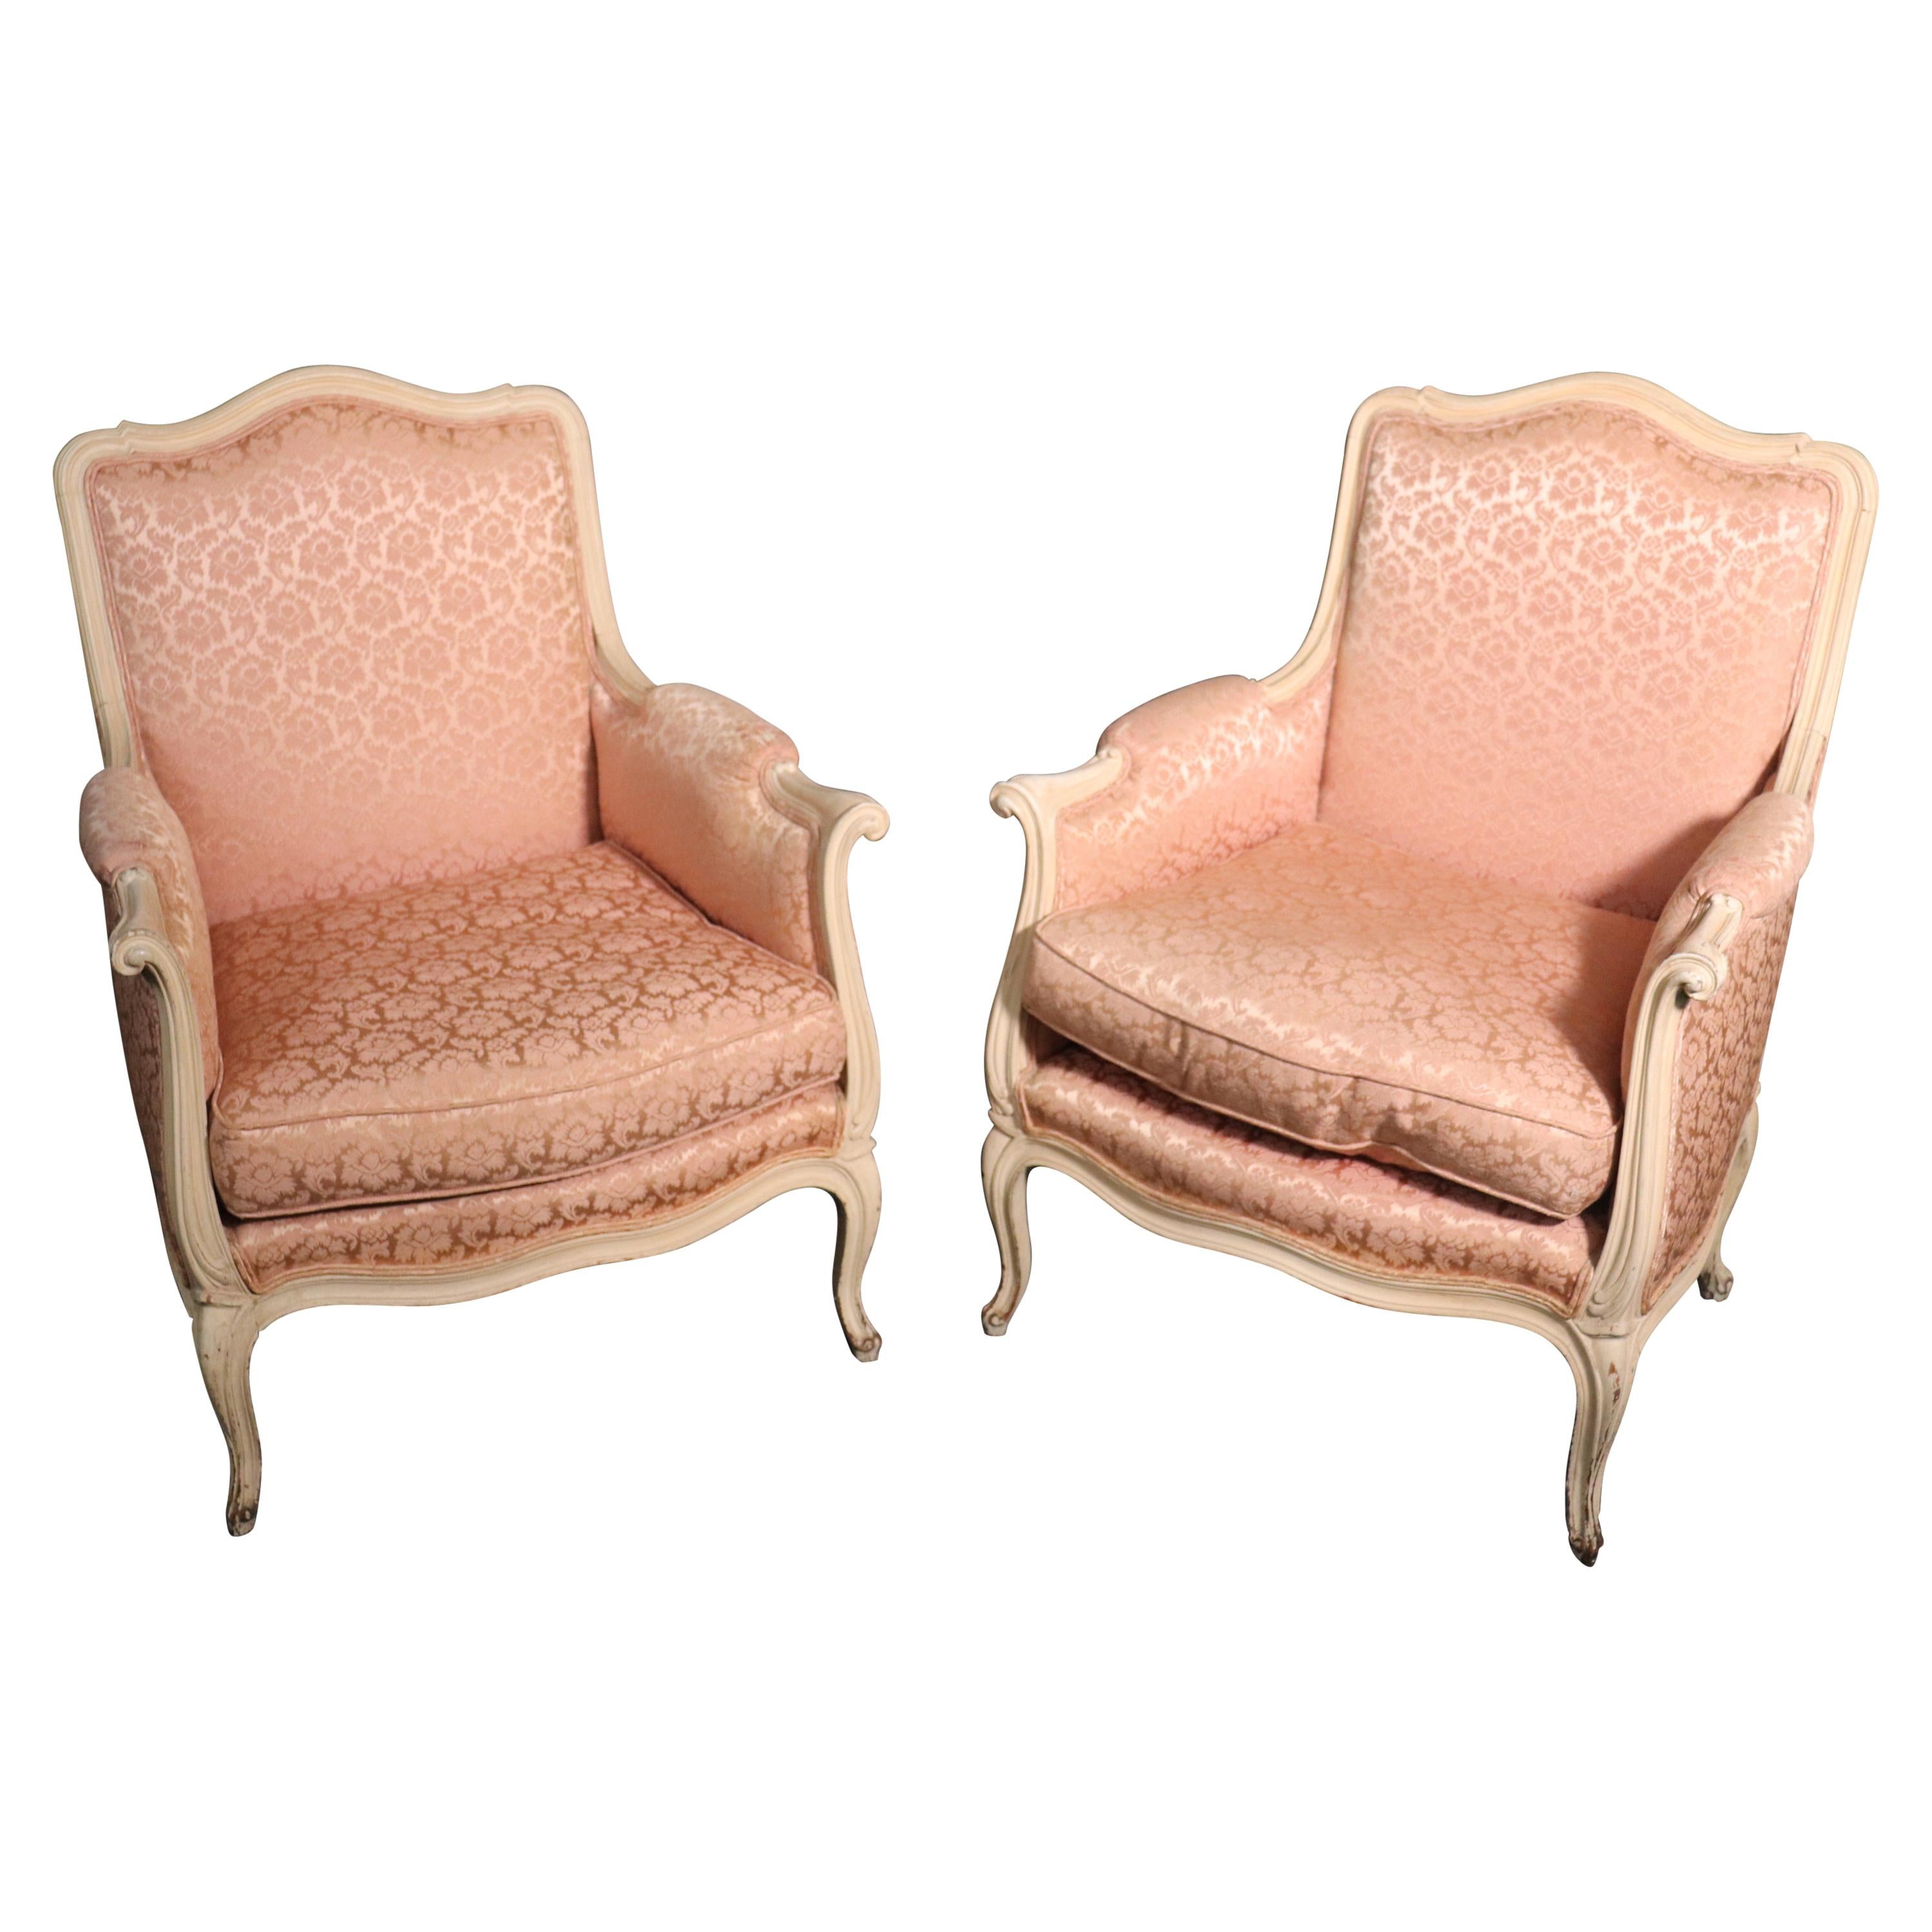 Pair of French Louis XV Crème Painted Bergère Lounge Chairs with Pink Damask